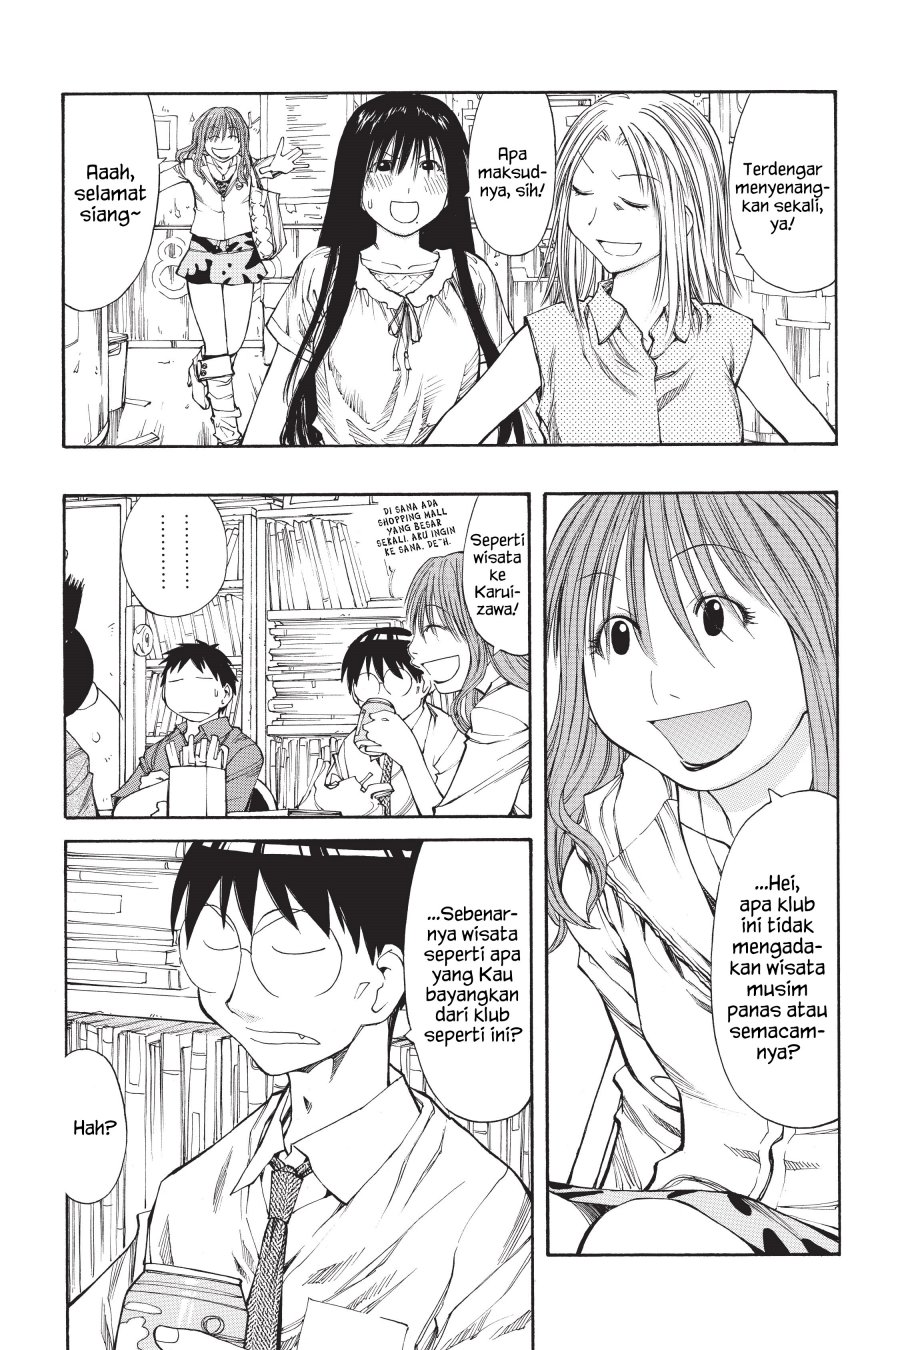 Genshiken – The Society for the Study of Modern Visual Culture Chapter 39 Image 12